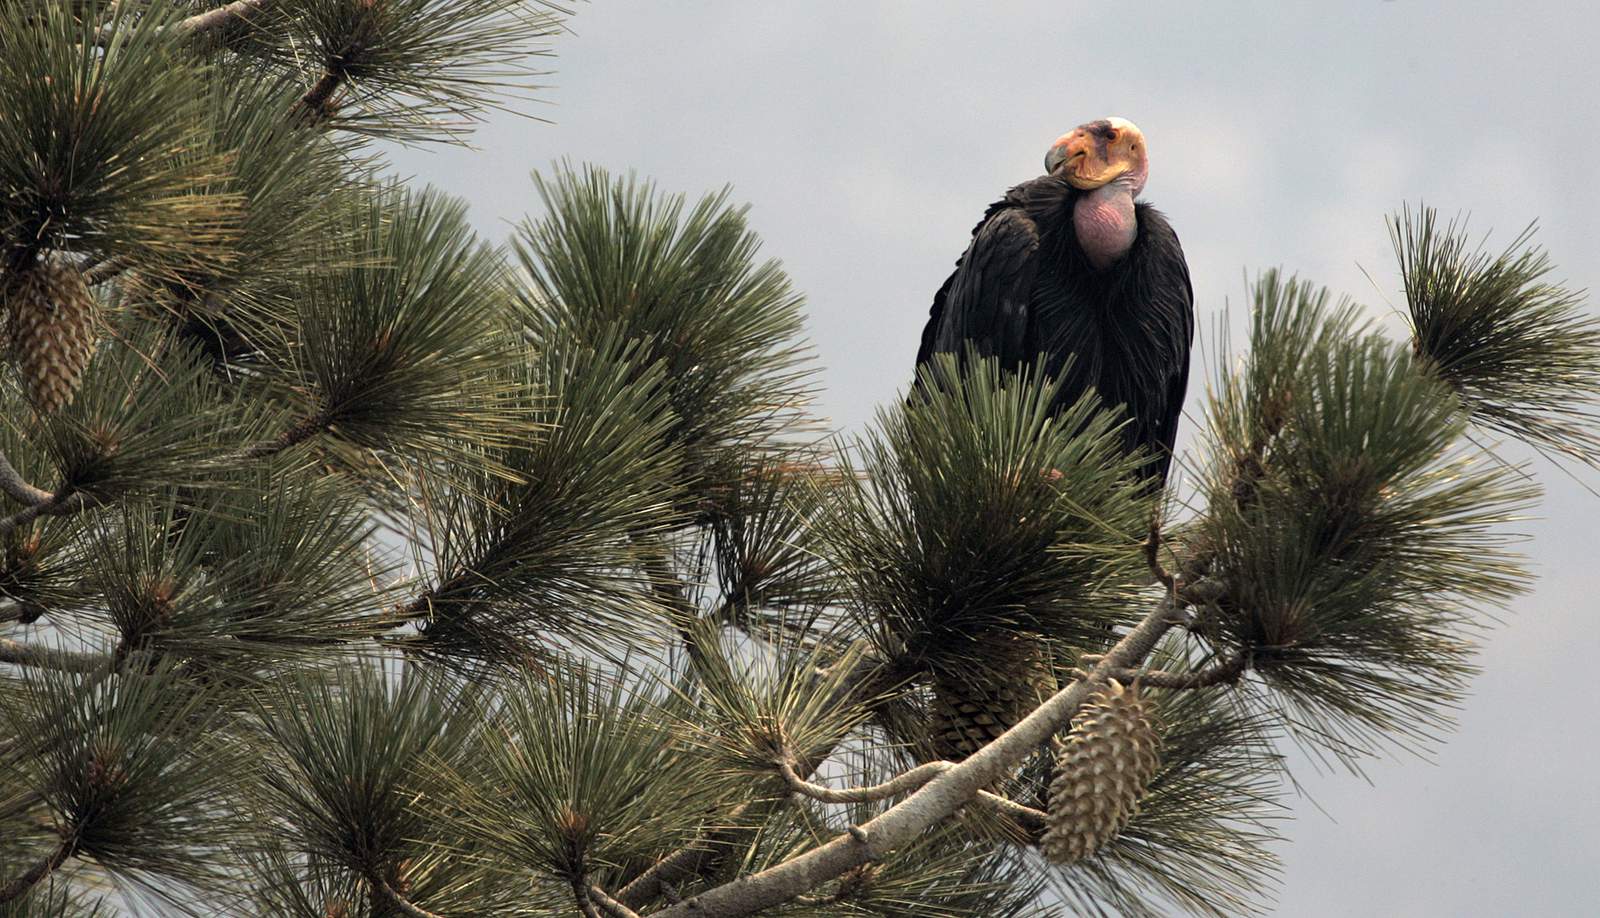 Fate of California condors unknown after sanctuary burns